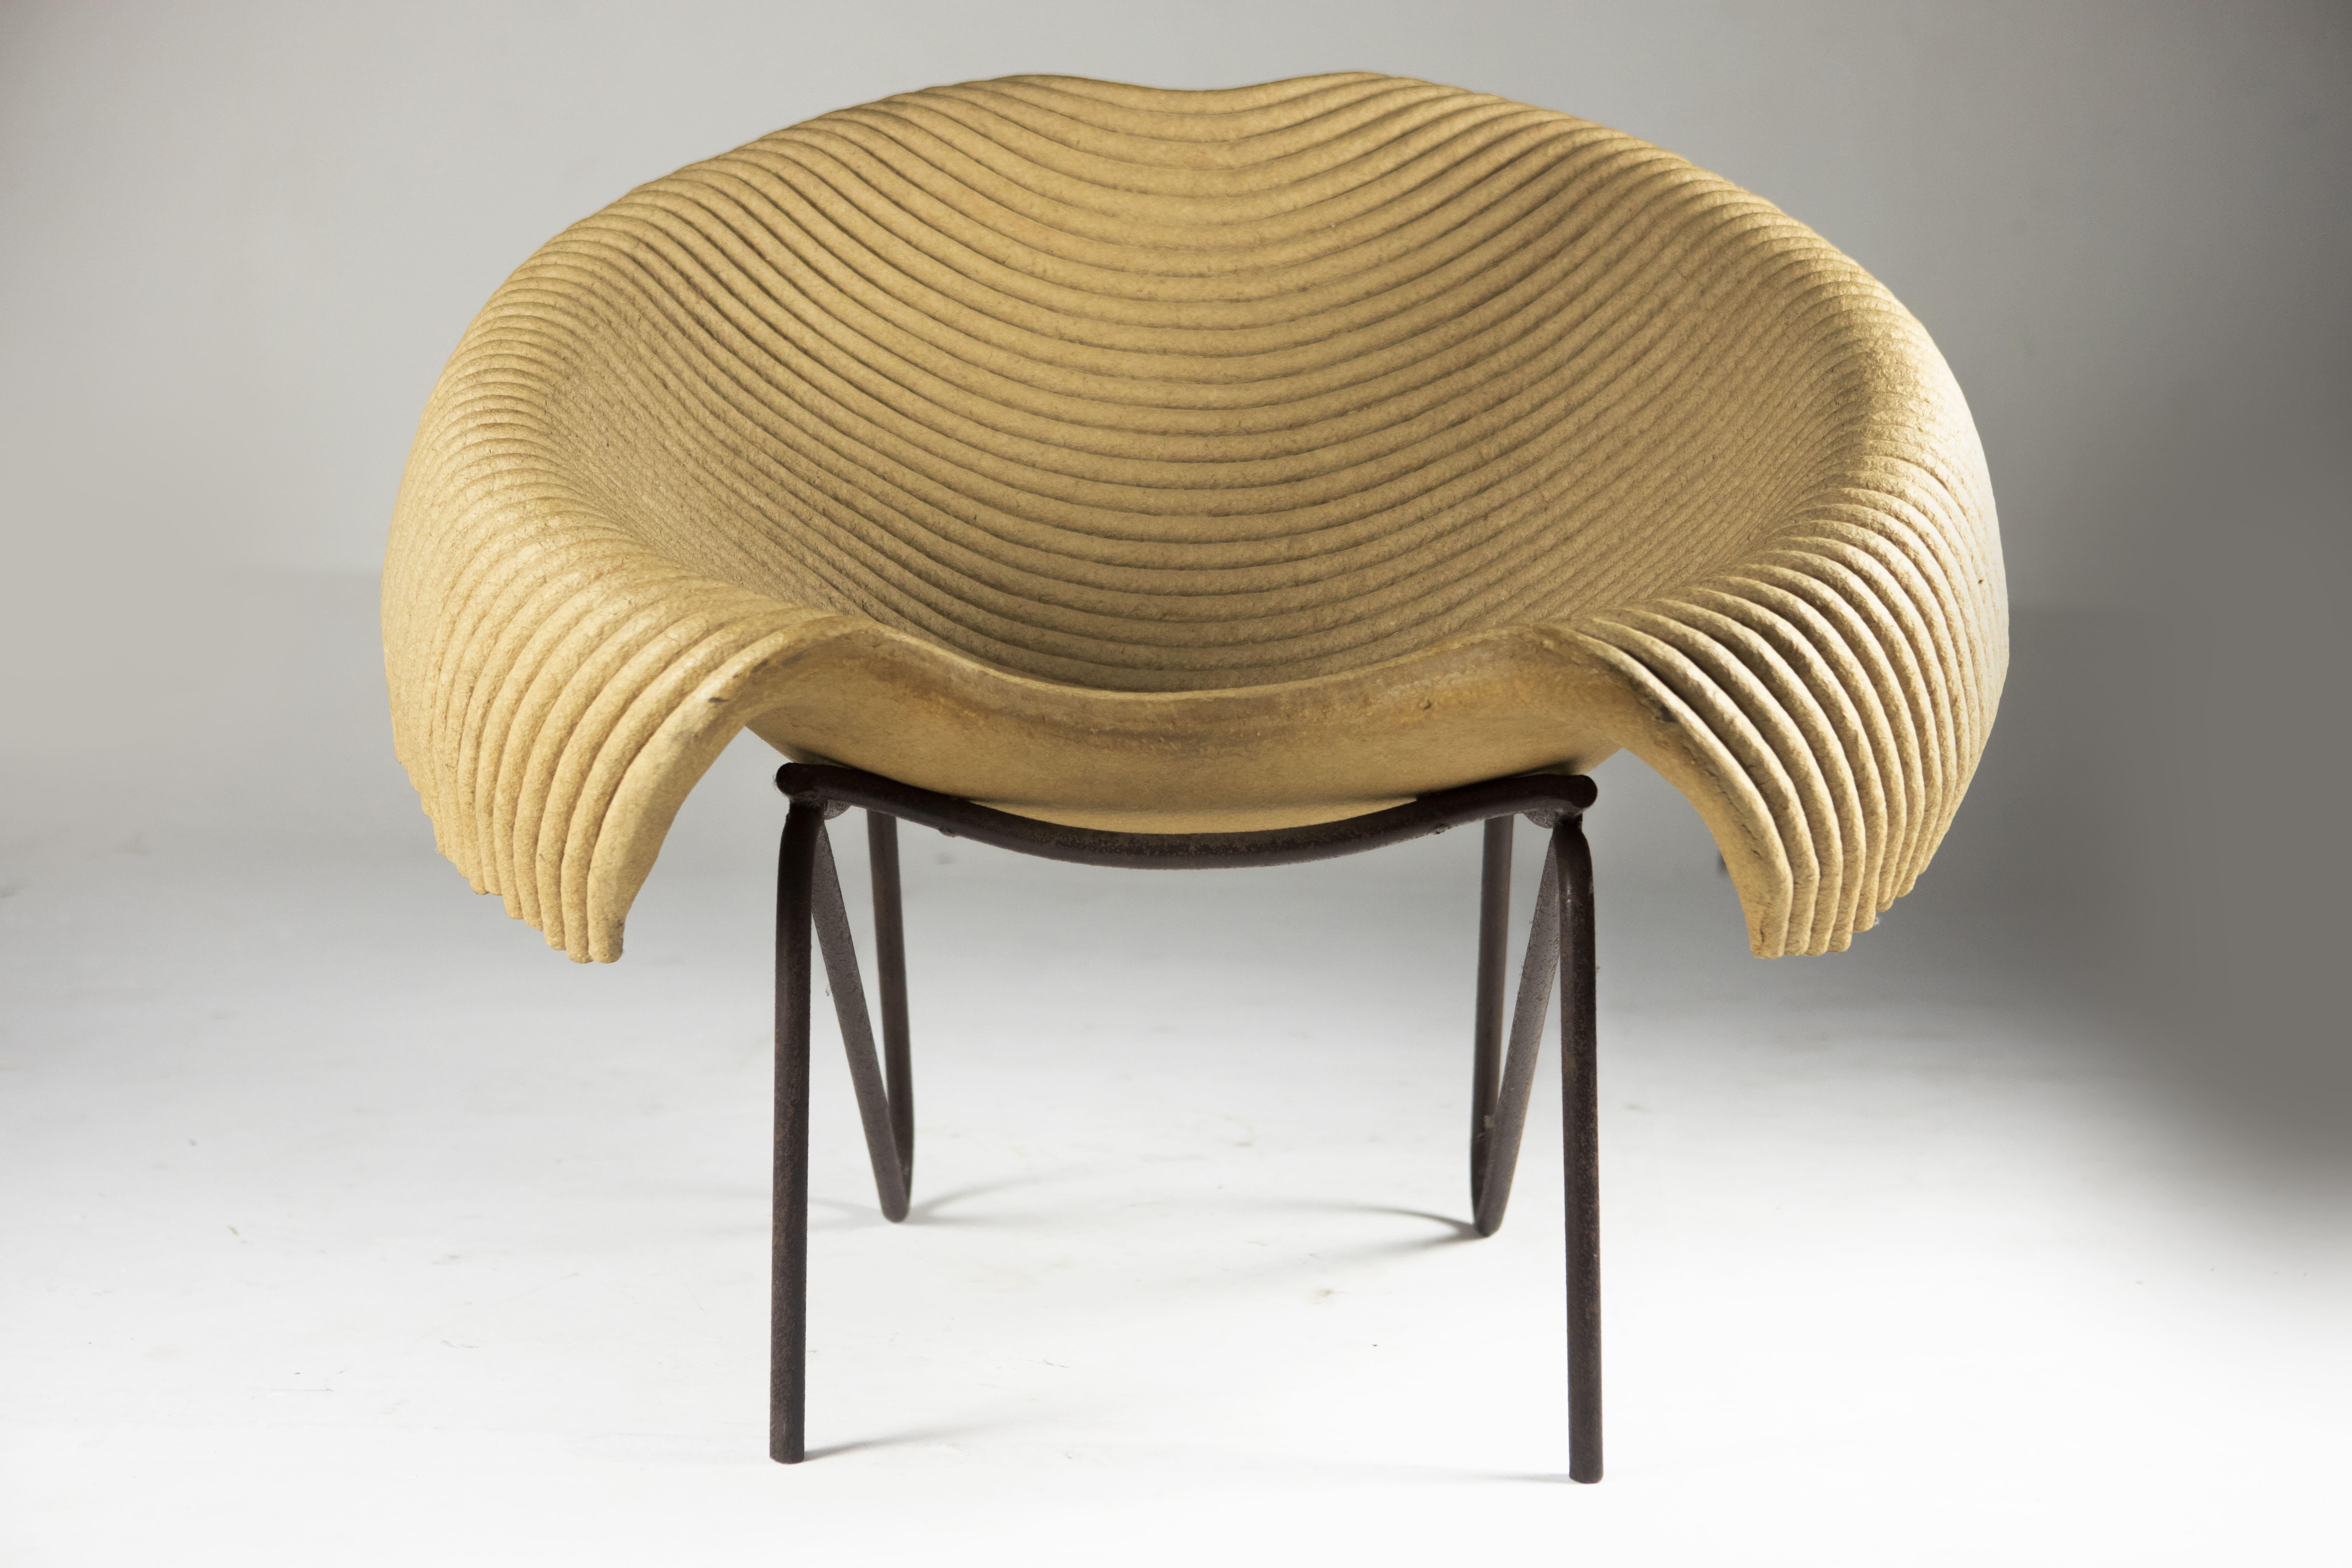 The Contemporary Leiras Lounge Chair by Domingos Tótora is a stunning example of the designer's commitment to sustainability and innovation. The chair is crafted entirely from recycled cardboard, which has been carefully layered and molded to create